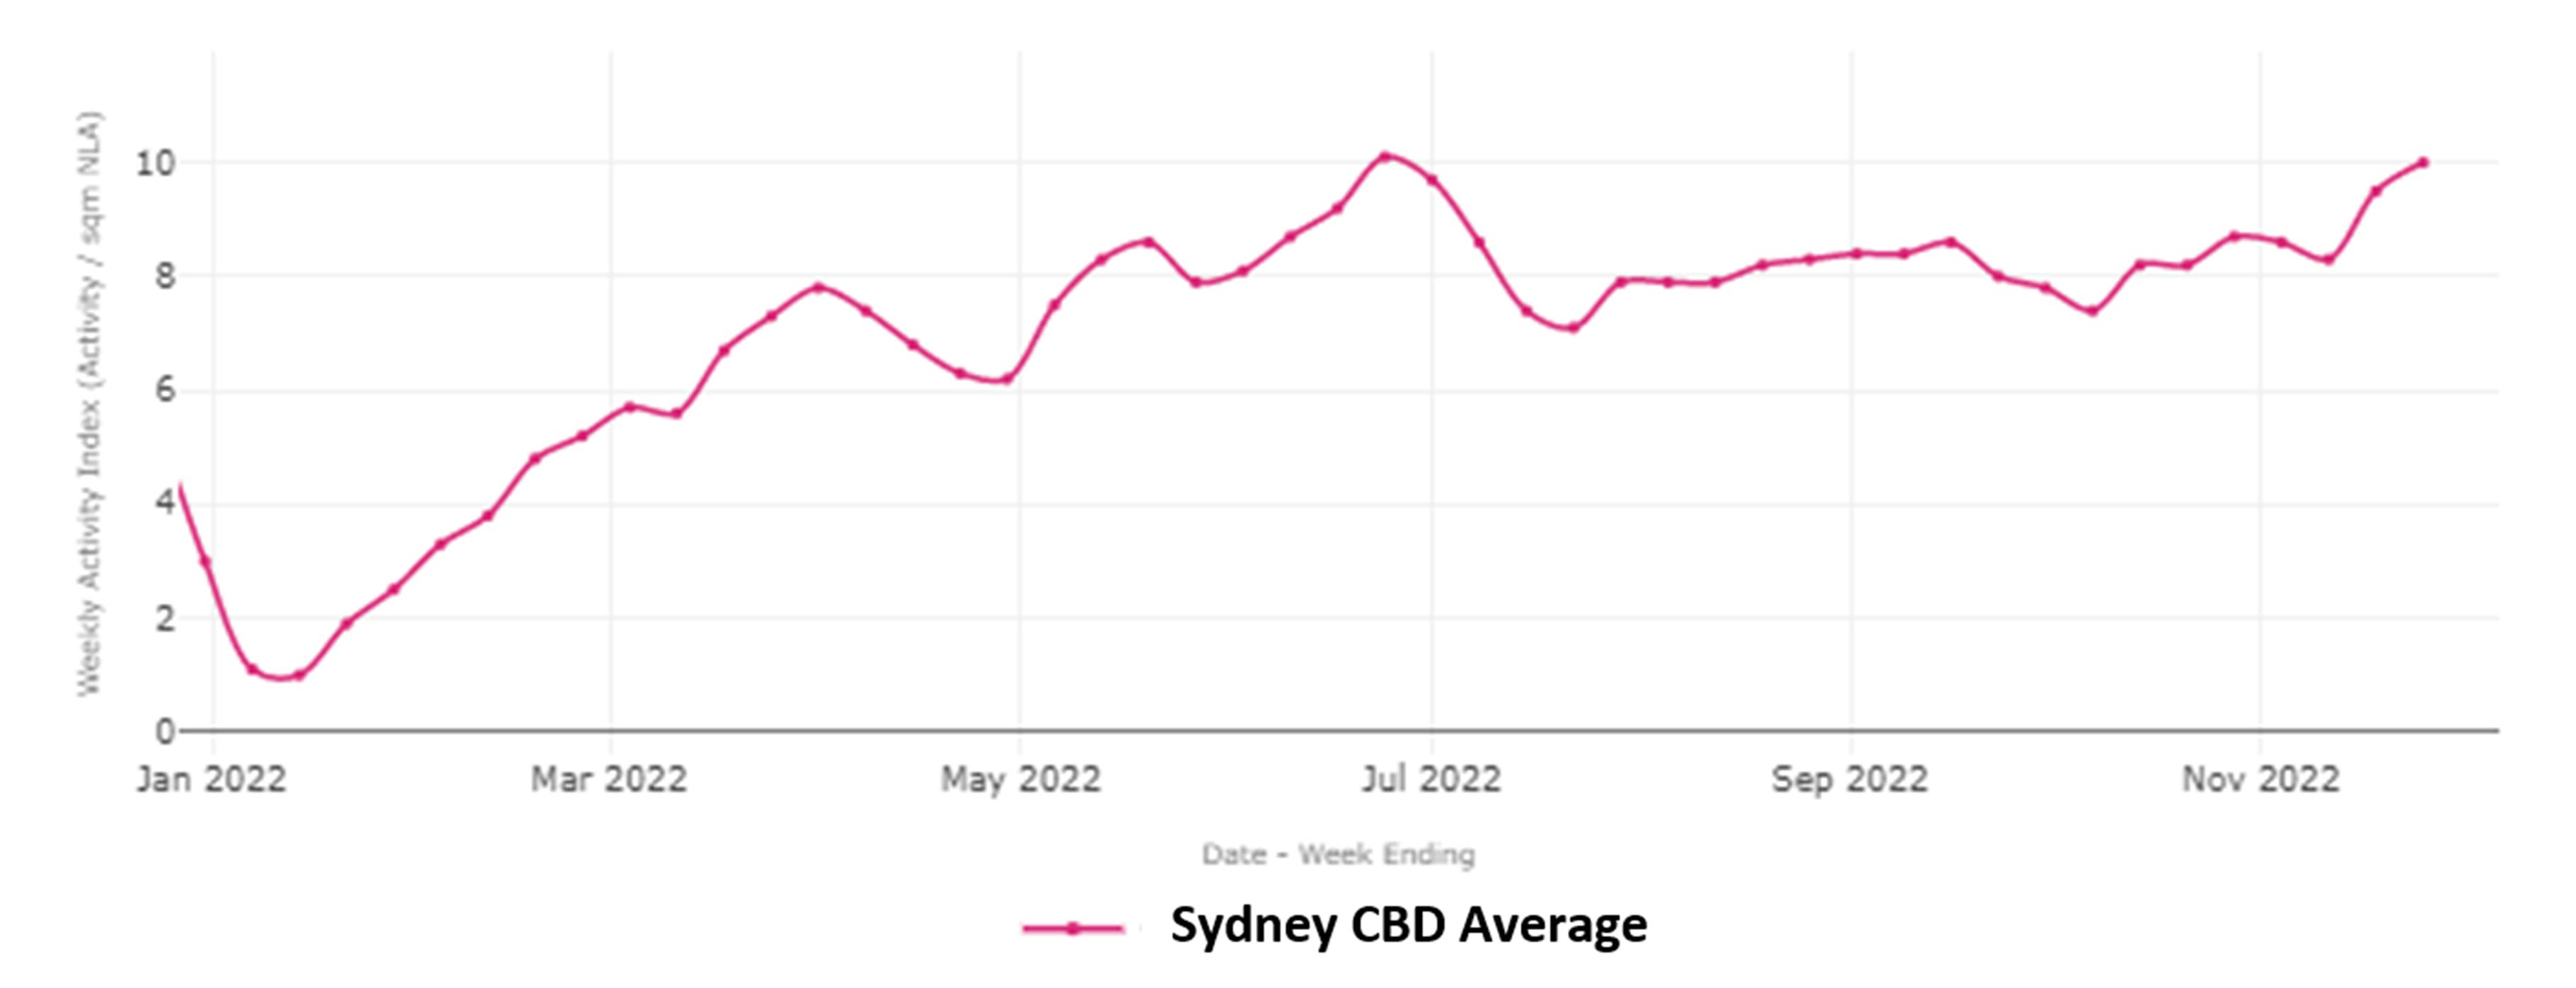 Graph showing Sydney's Worker Activity Index from January 2022 until end of November 2022